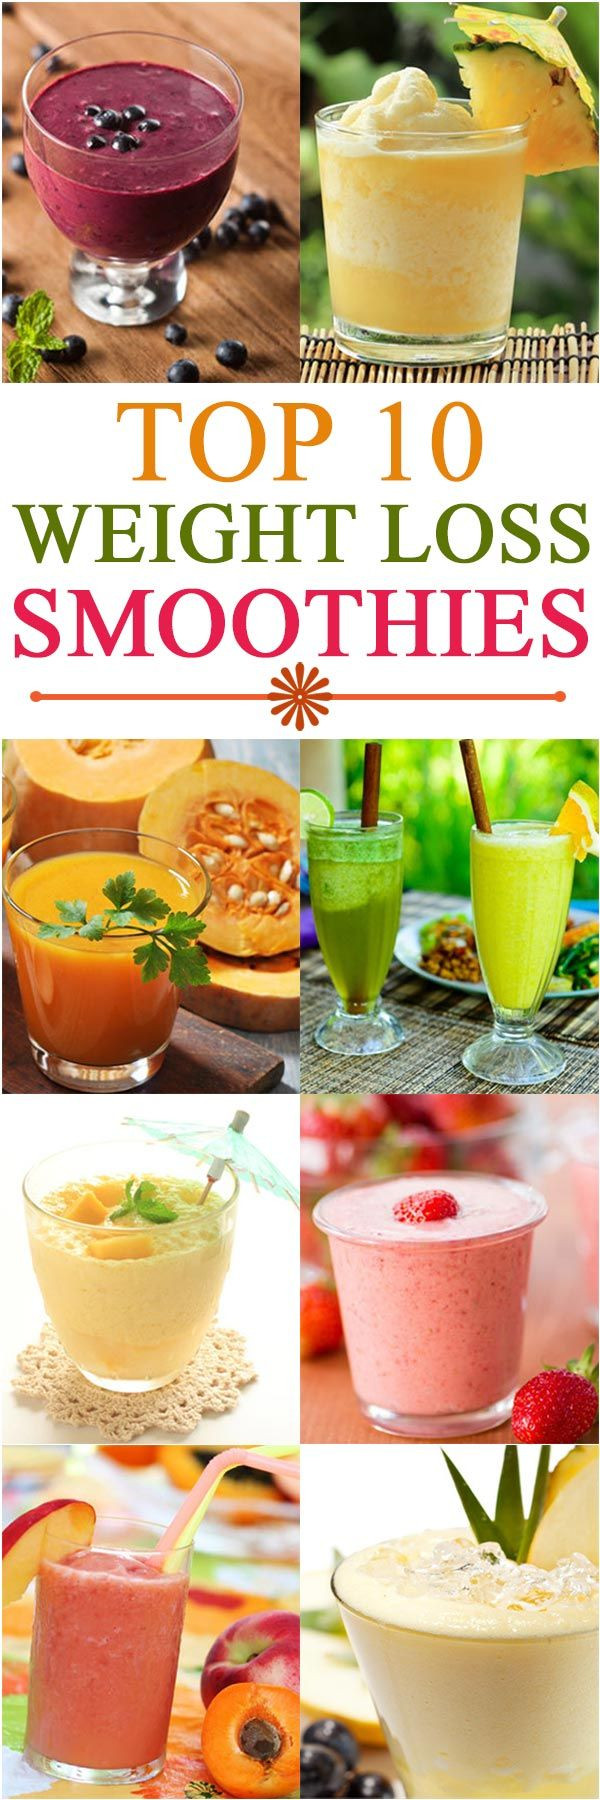 Healthy Fruit And Vegetable Smoothie Recipes For Weight Loss
 Pin on Healthy living